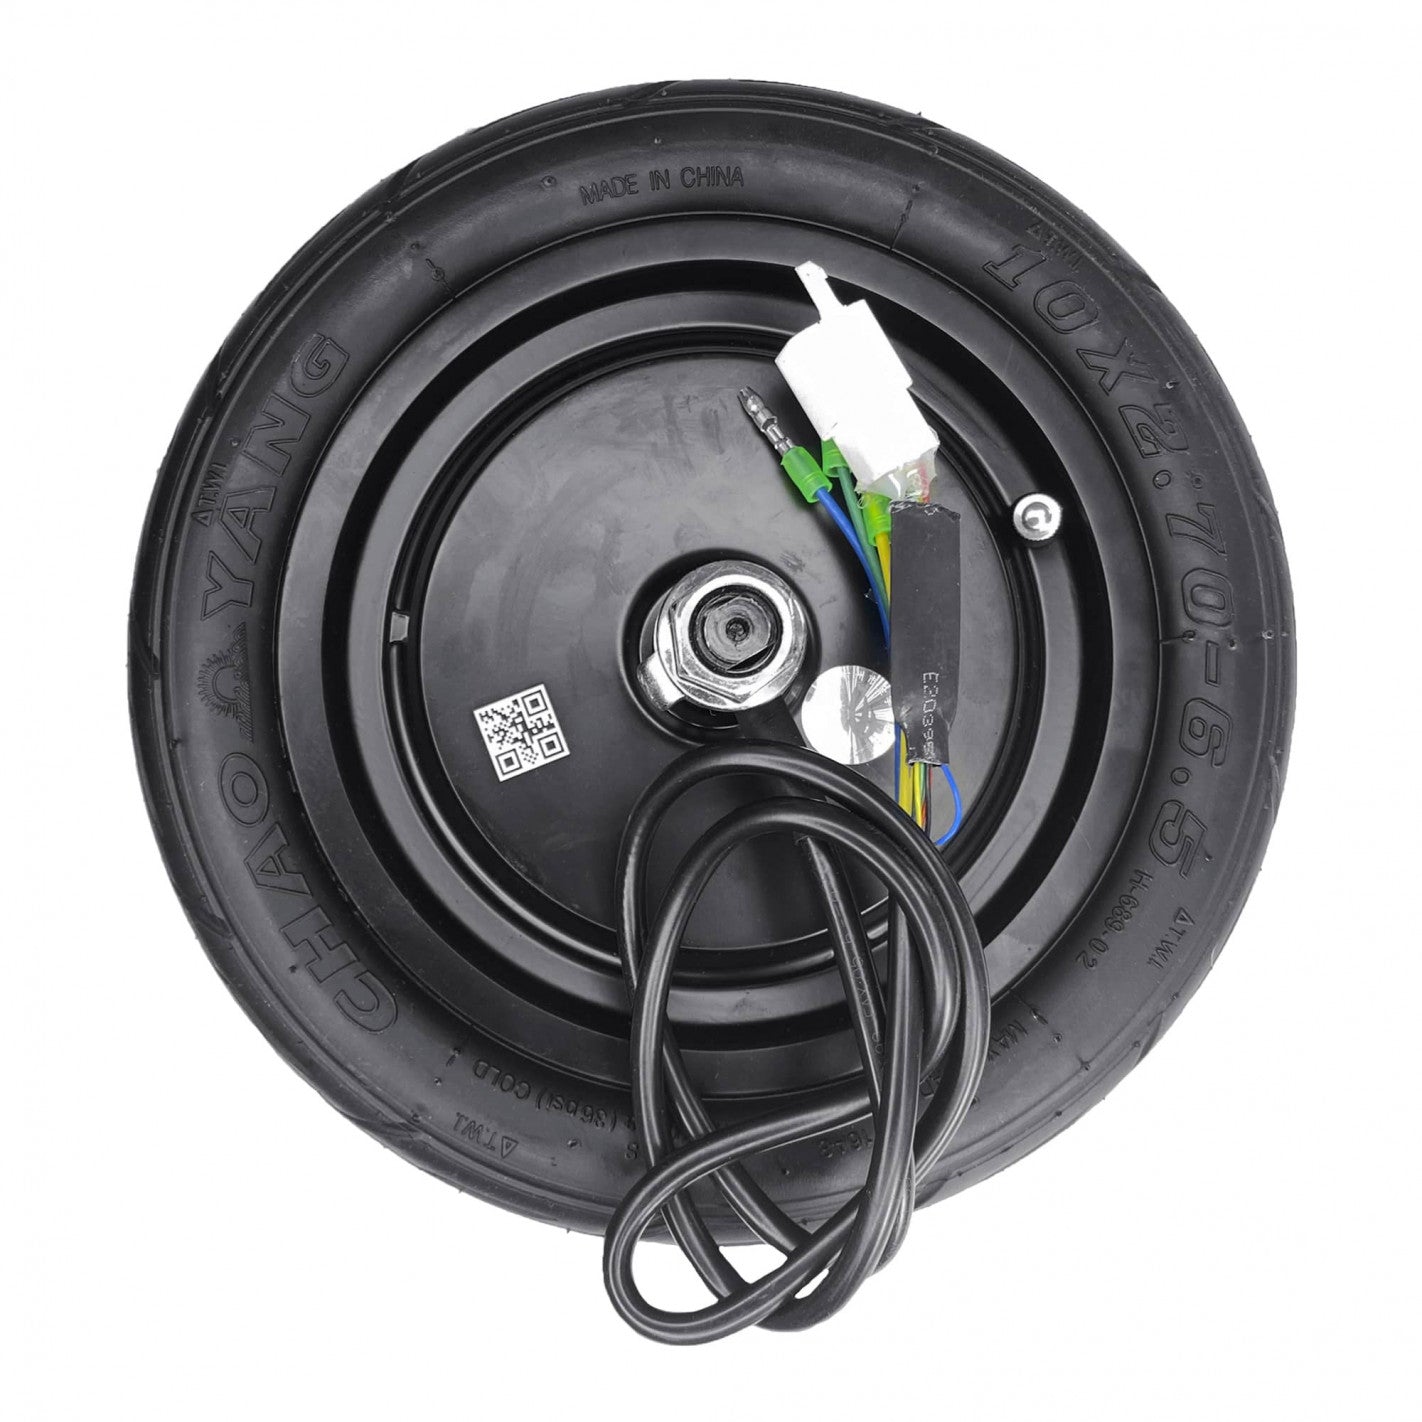 ZWHEEL 600W Motor + 10' Neumático Tubeless Cable Interior Eje Ø17mm T4-2022